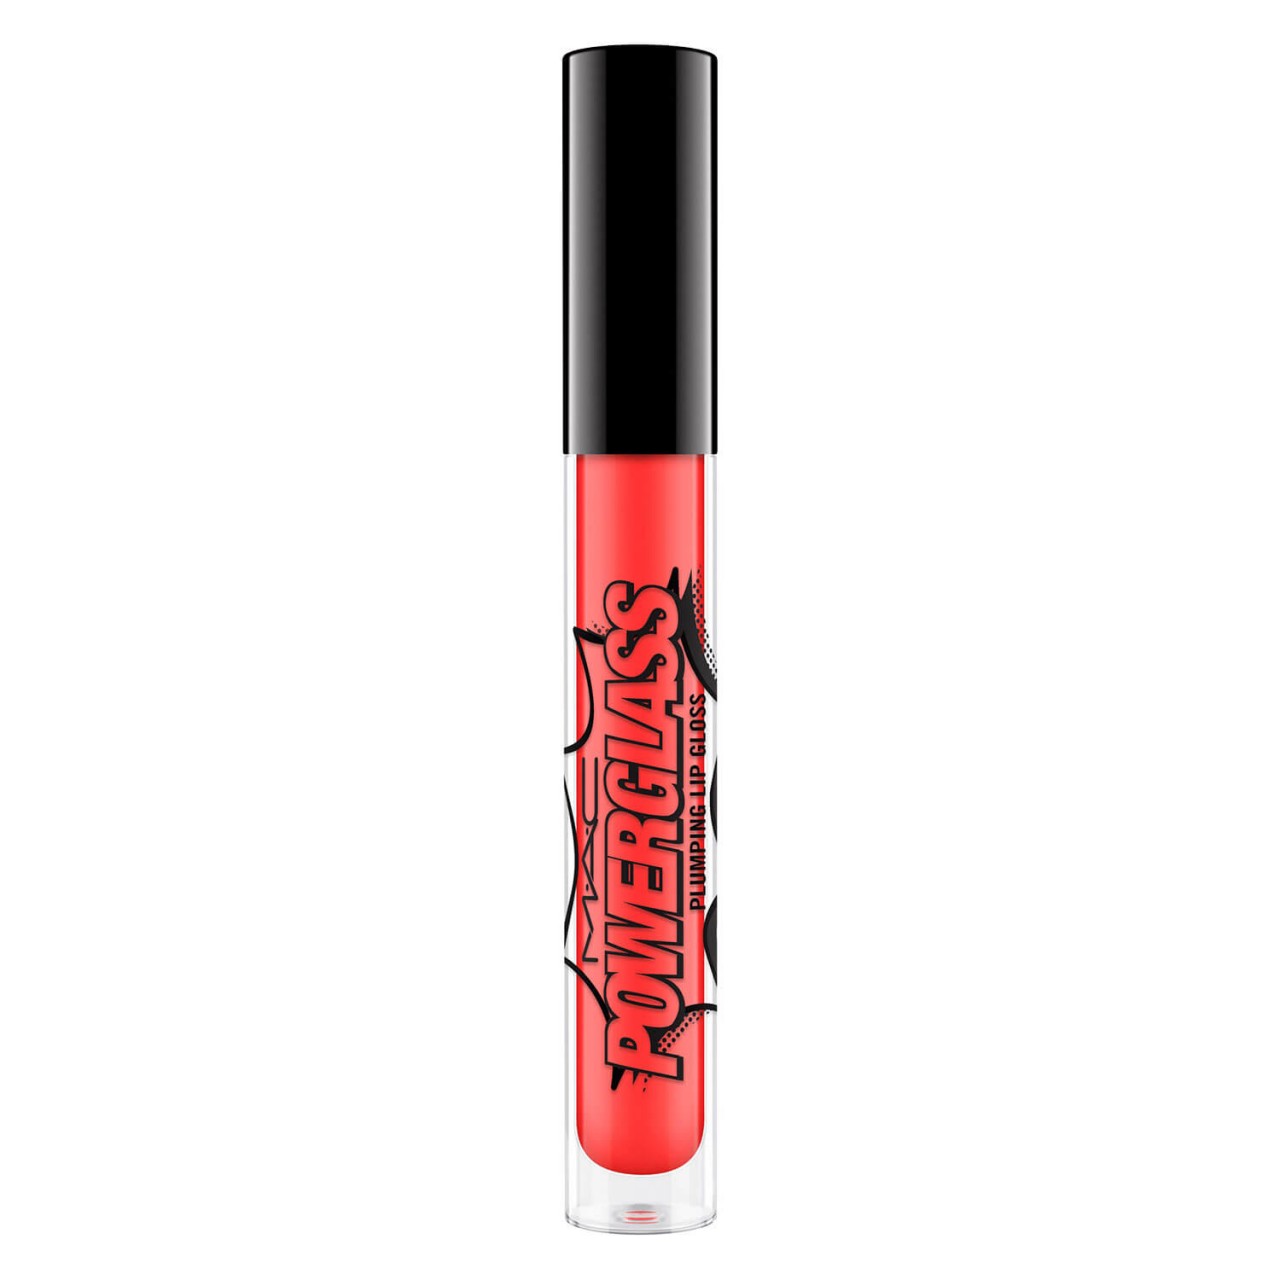 Powerglass - Plumping Lipgloss Seriously Stoked von M·A·C